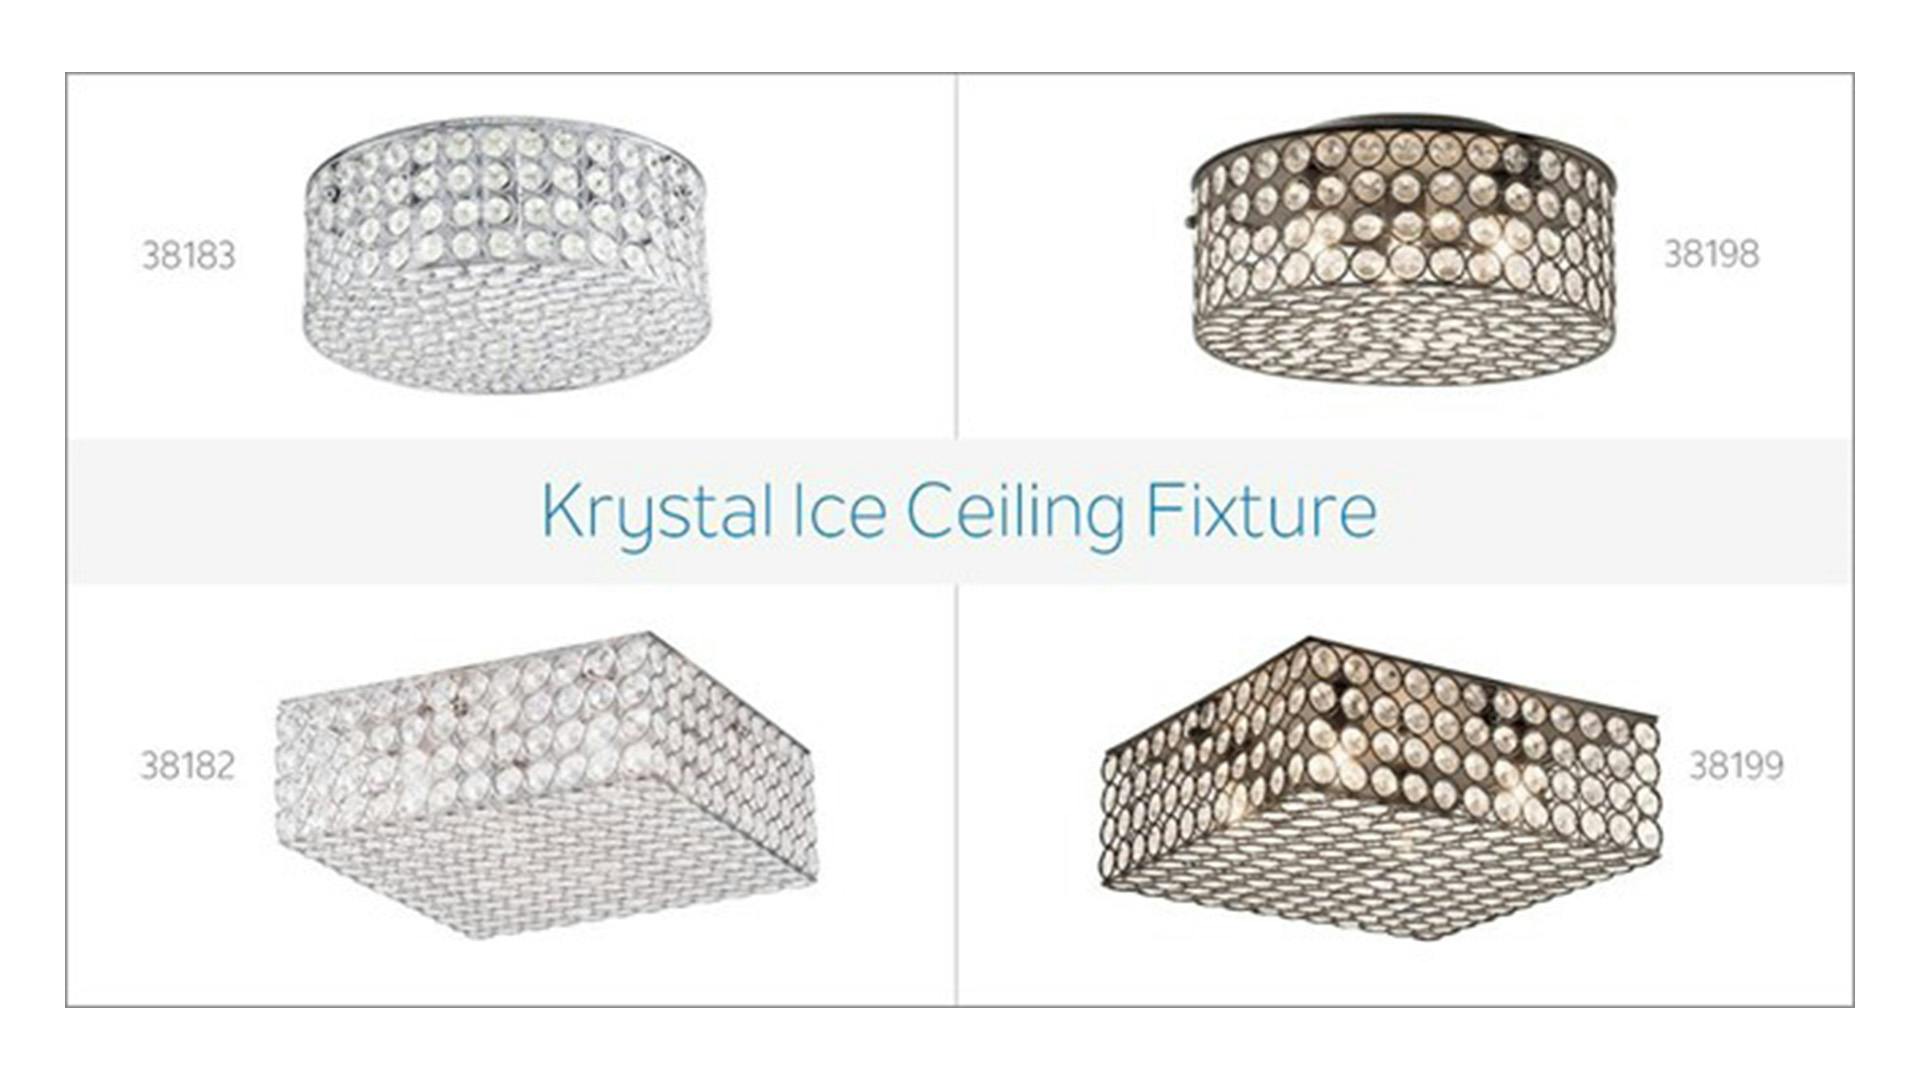 Krystal Ice ceiling fixtures on white background.